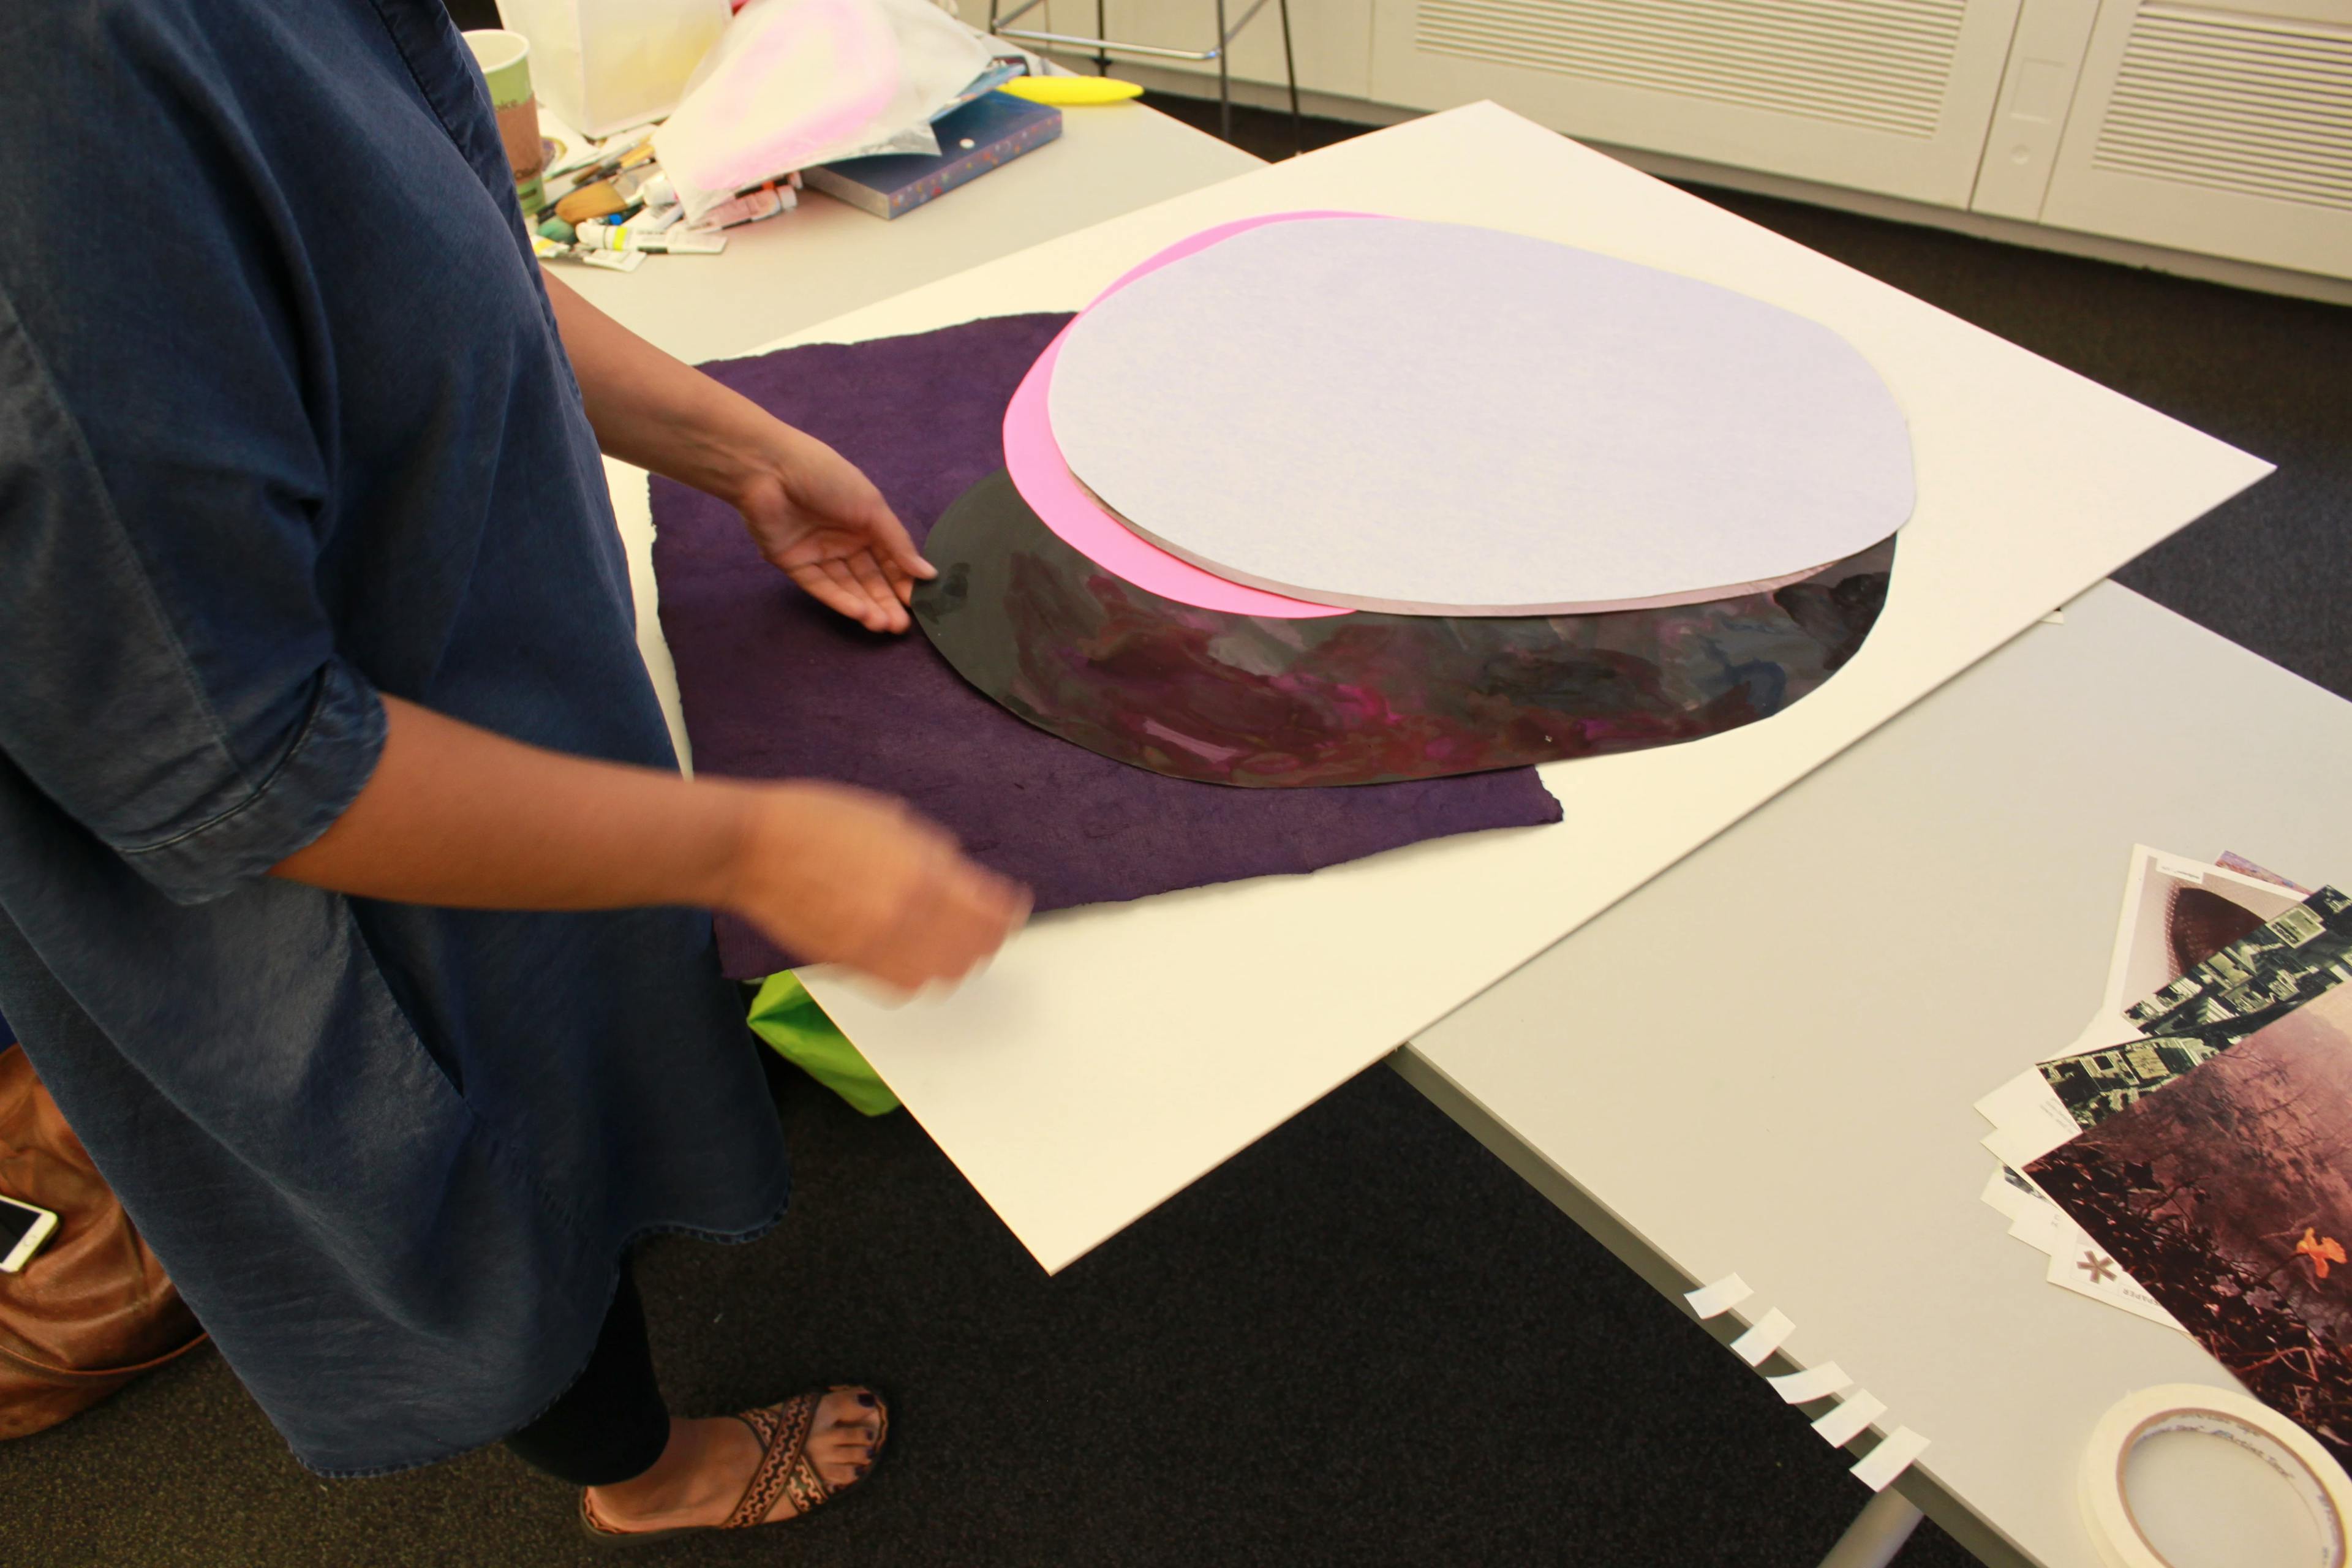 Artist Xochi Solis layering down different purple circles to construct her collage artwork.